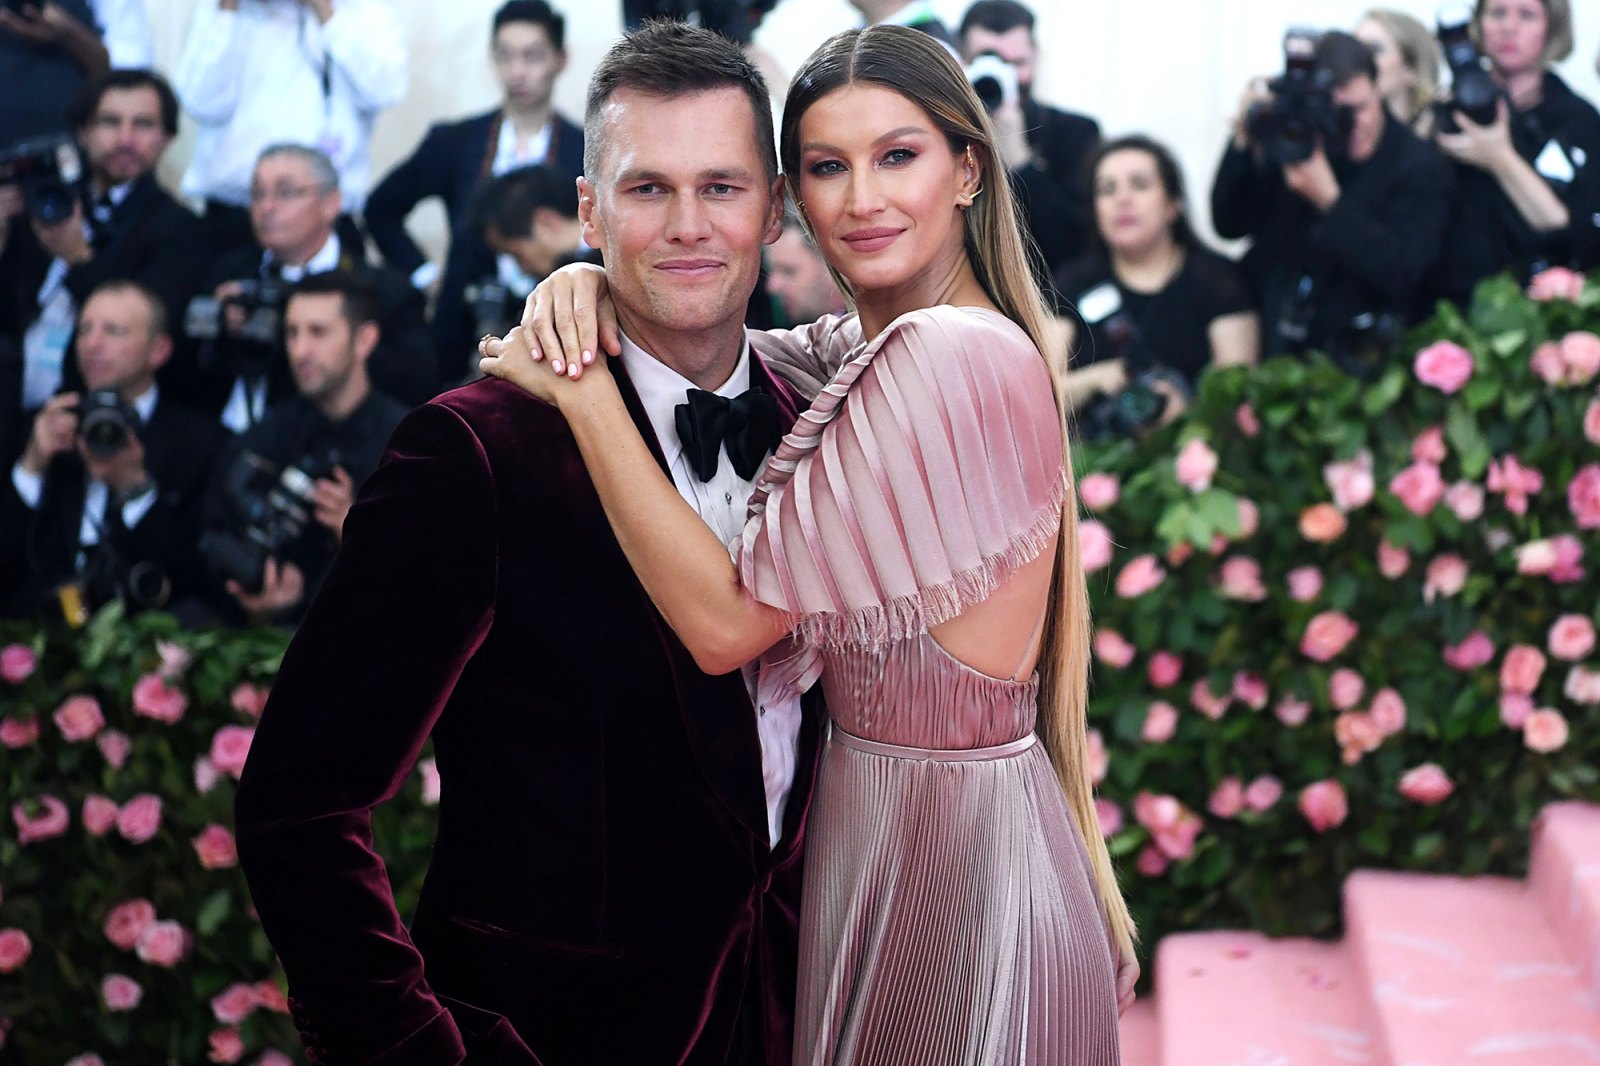 Tom Brady Calls Gisele Bundchen 'The Best Thing That Ever Happened' to Him on 13th Wedding Anniversary